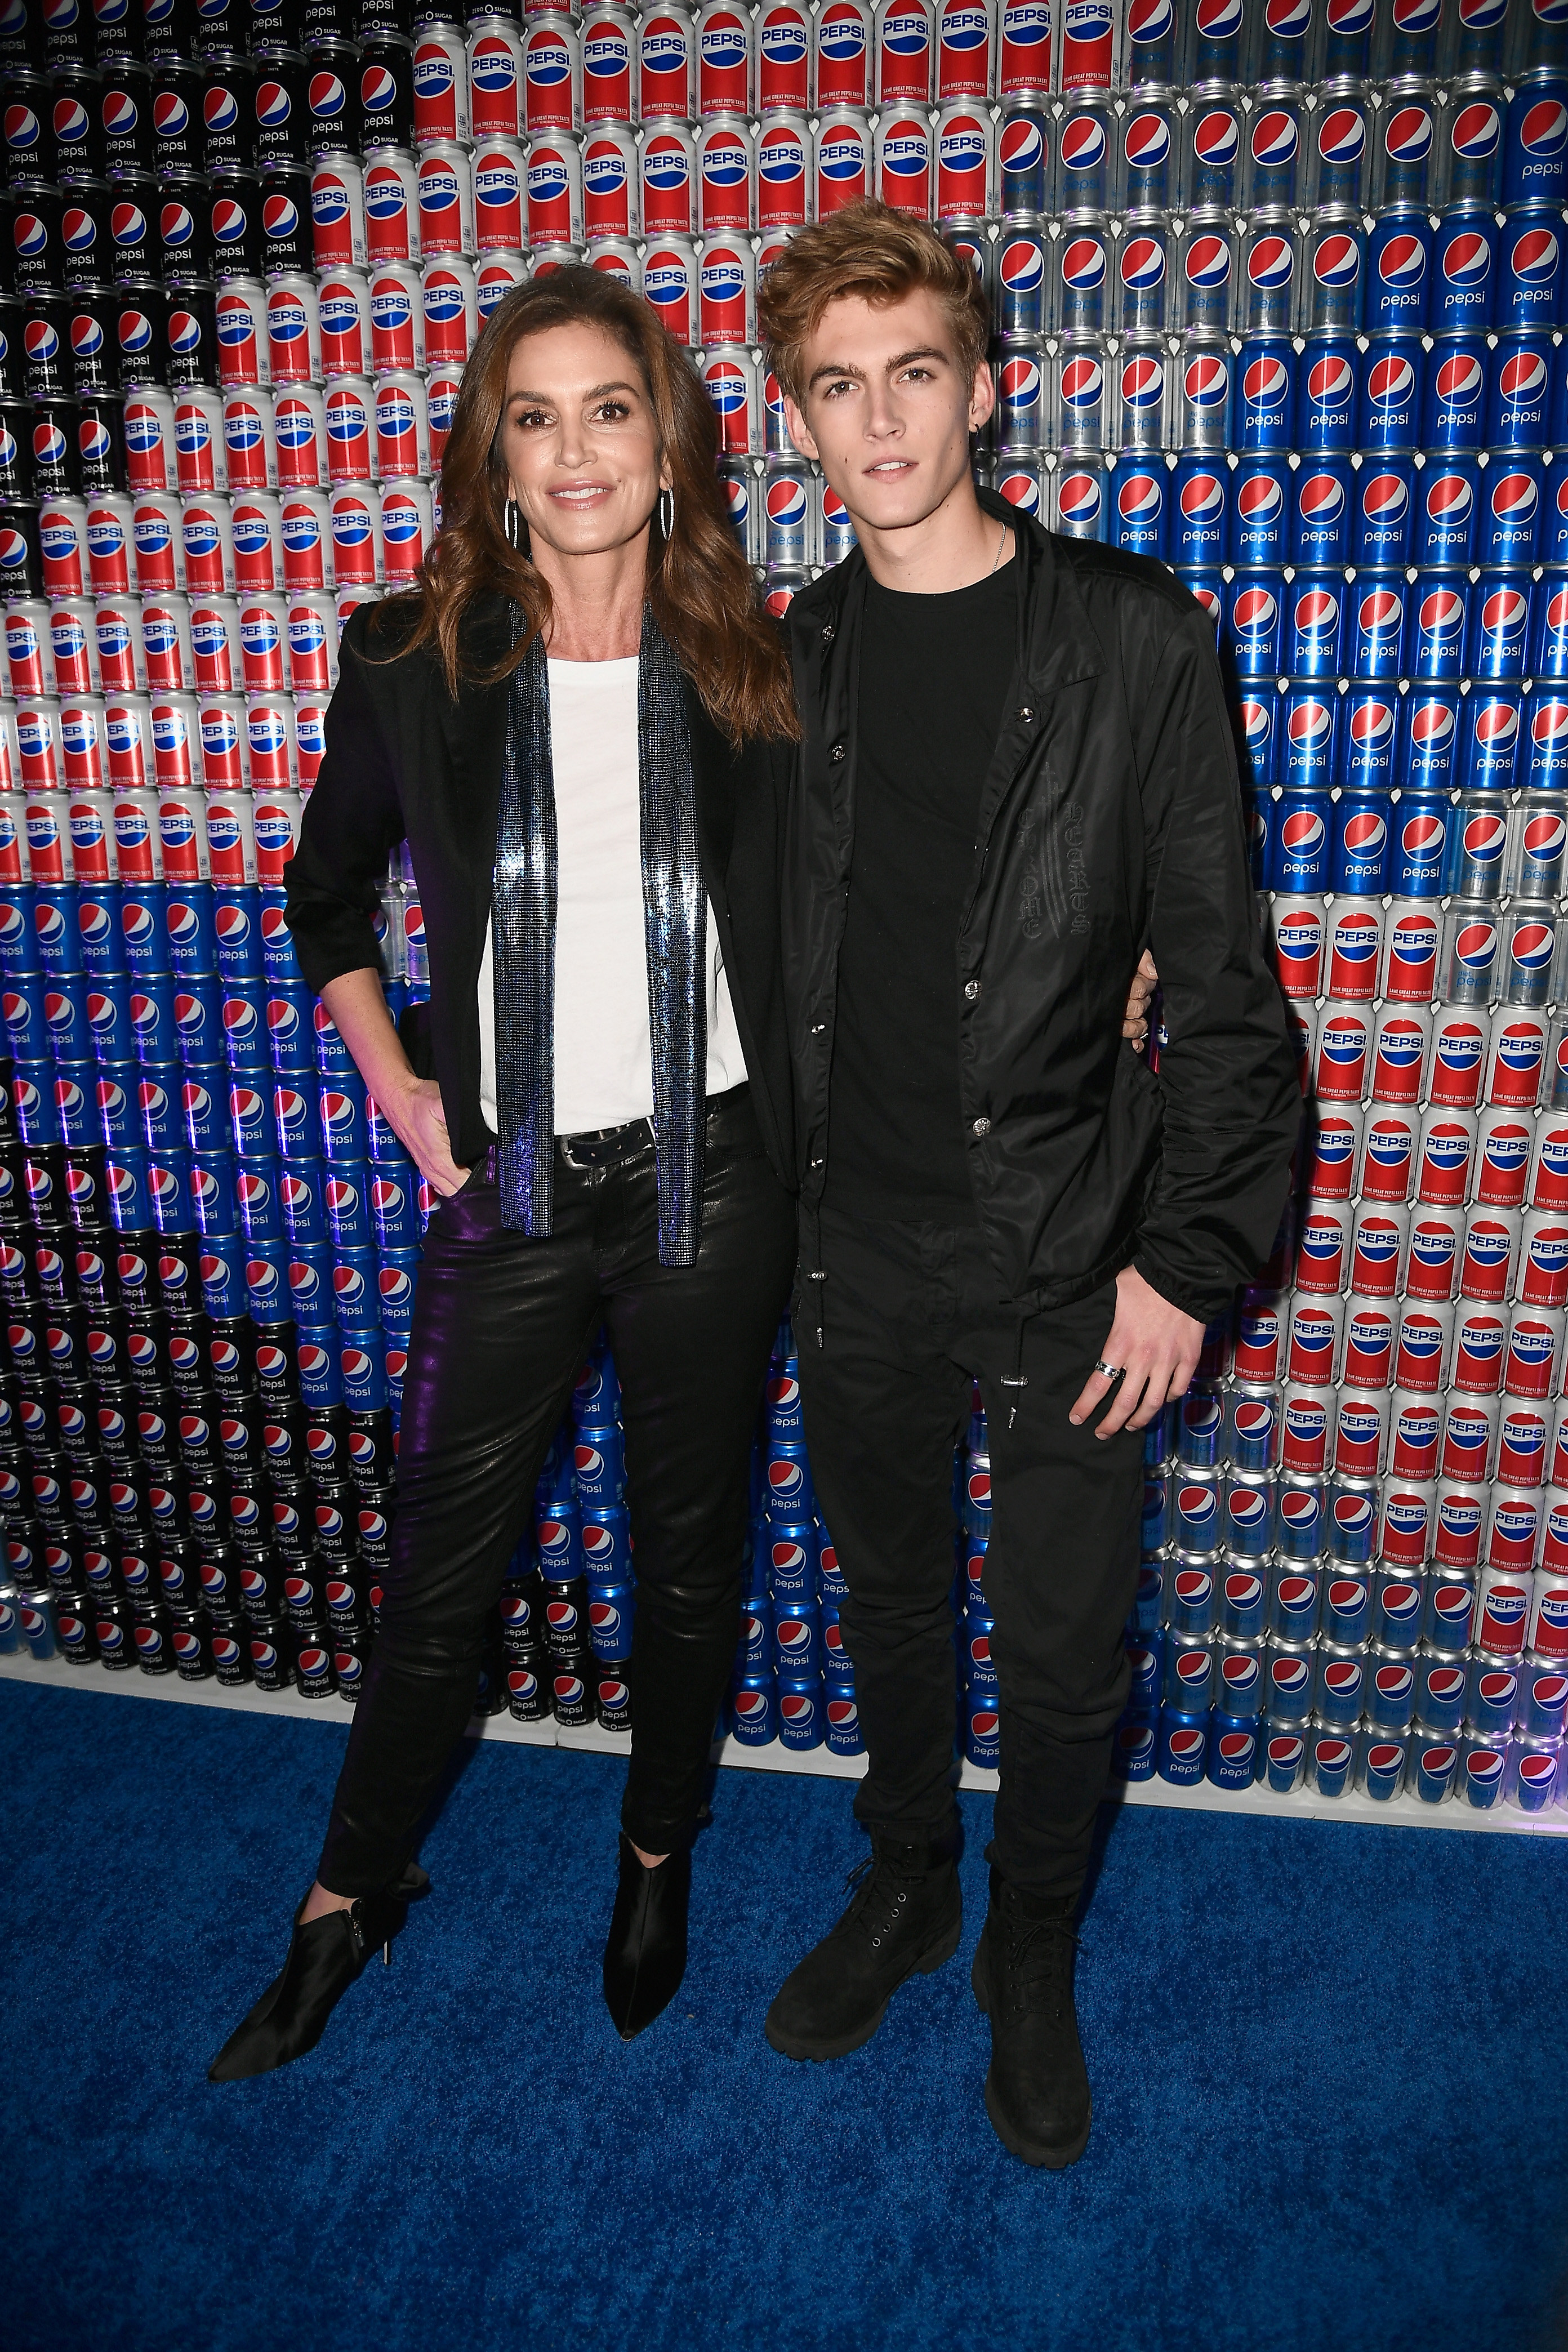 Cindy Crawford and Presley Gerber arrive at the Pepsi Generations Live Pop-Up in 2018